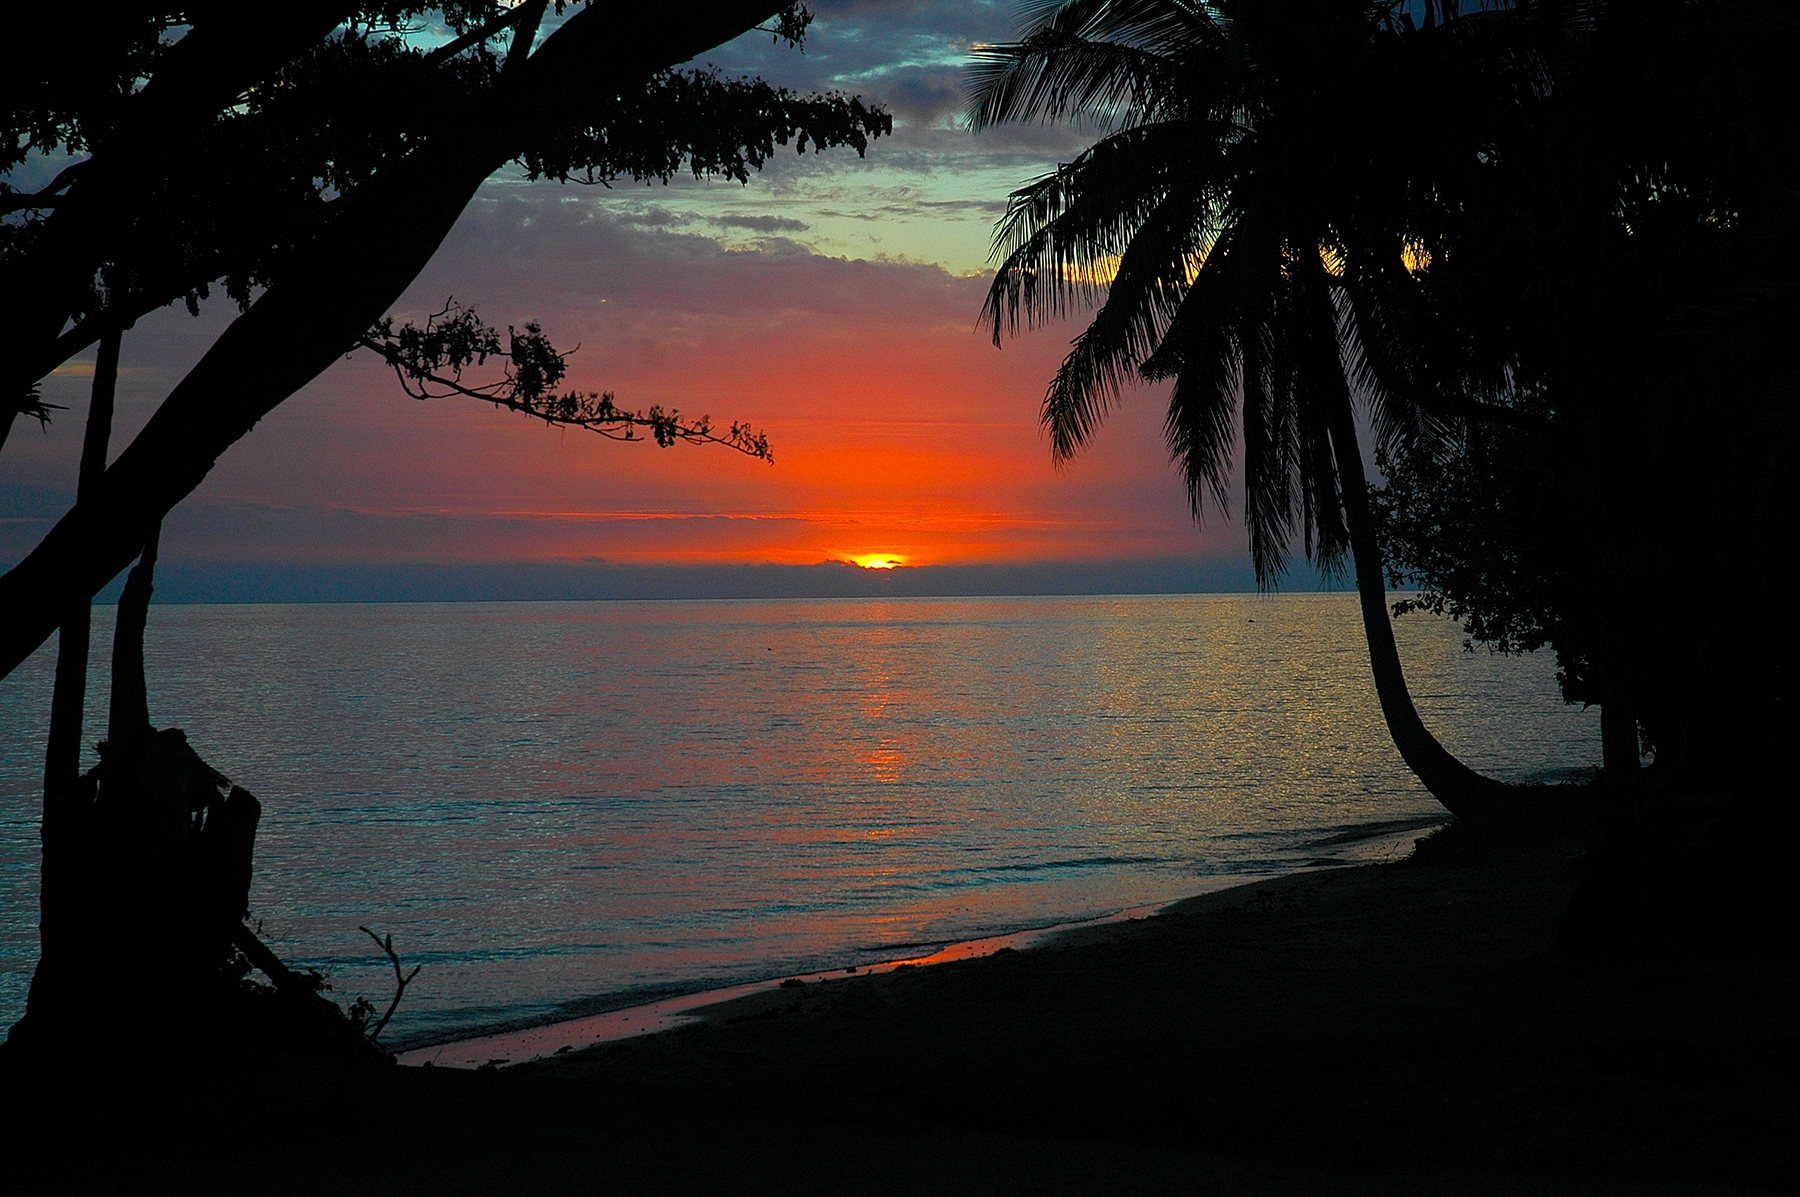 Sunset on beach below the Malolo Island subdivision